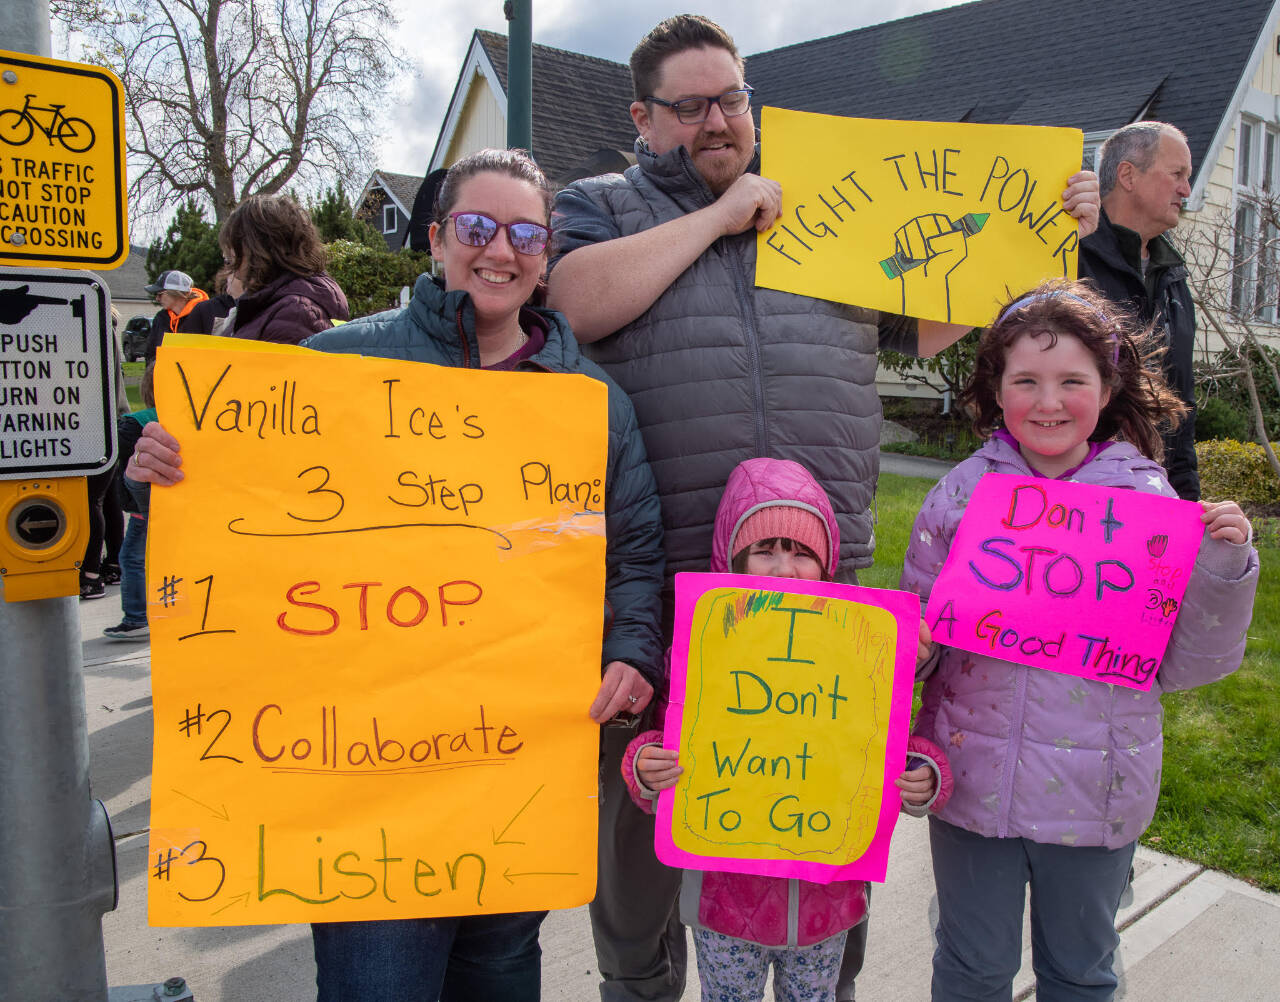 Sequim Gazette photo by Emily Matthiessen / Wynn and Jared Hannam, joined here by youngsters Nora (center) and Ellie, protest on April 17 the reconfiguration of Sequim’s elementary schools. The Hannams live within walking distance of Helen Haller Elementary School. “They want to be together at school,” Jaren Hannam said. “They shouldn’t have to ride the bus an hour when they live within walking distance.”